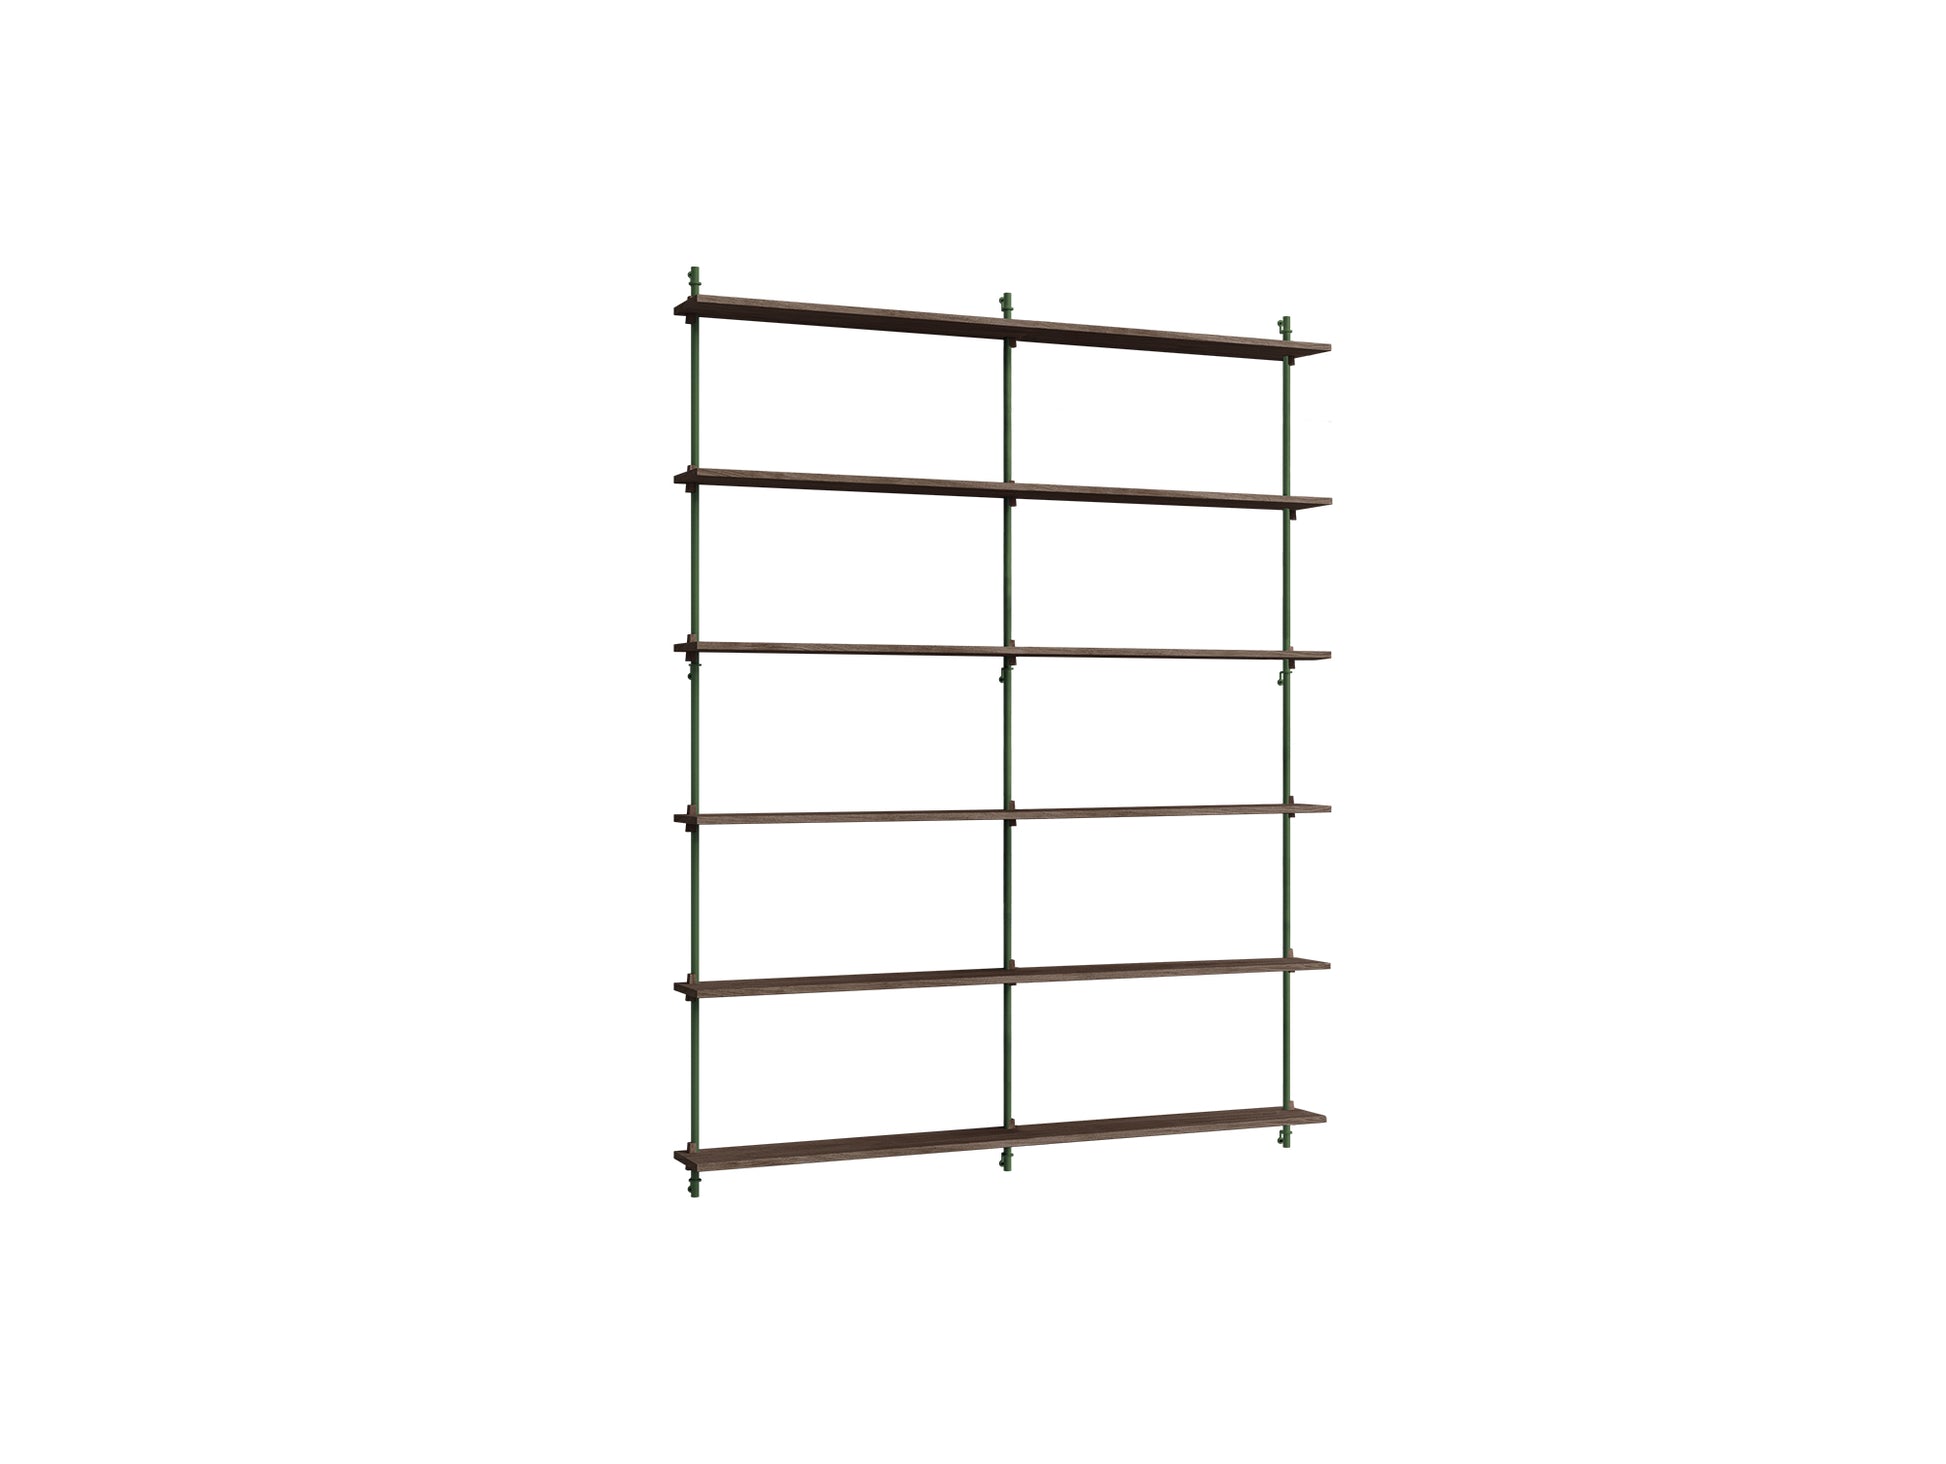 Wall Shelving System Sets (200 cm) by Moebe - WS.200.2.B / Pine Green Uprights / Smoked Oak